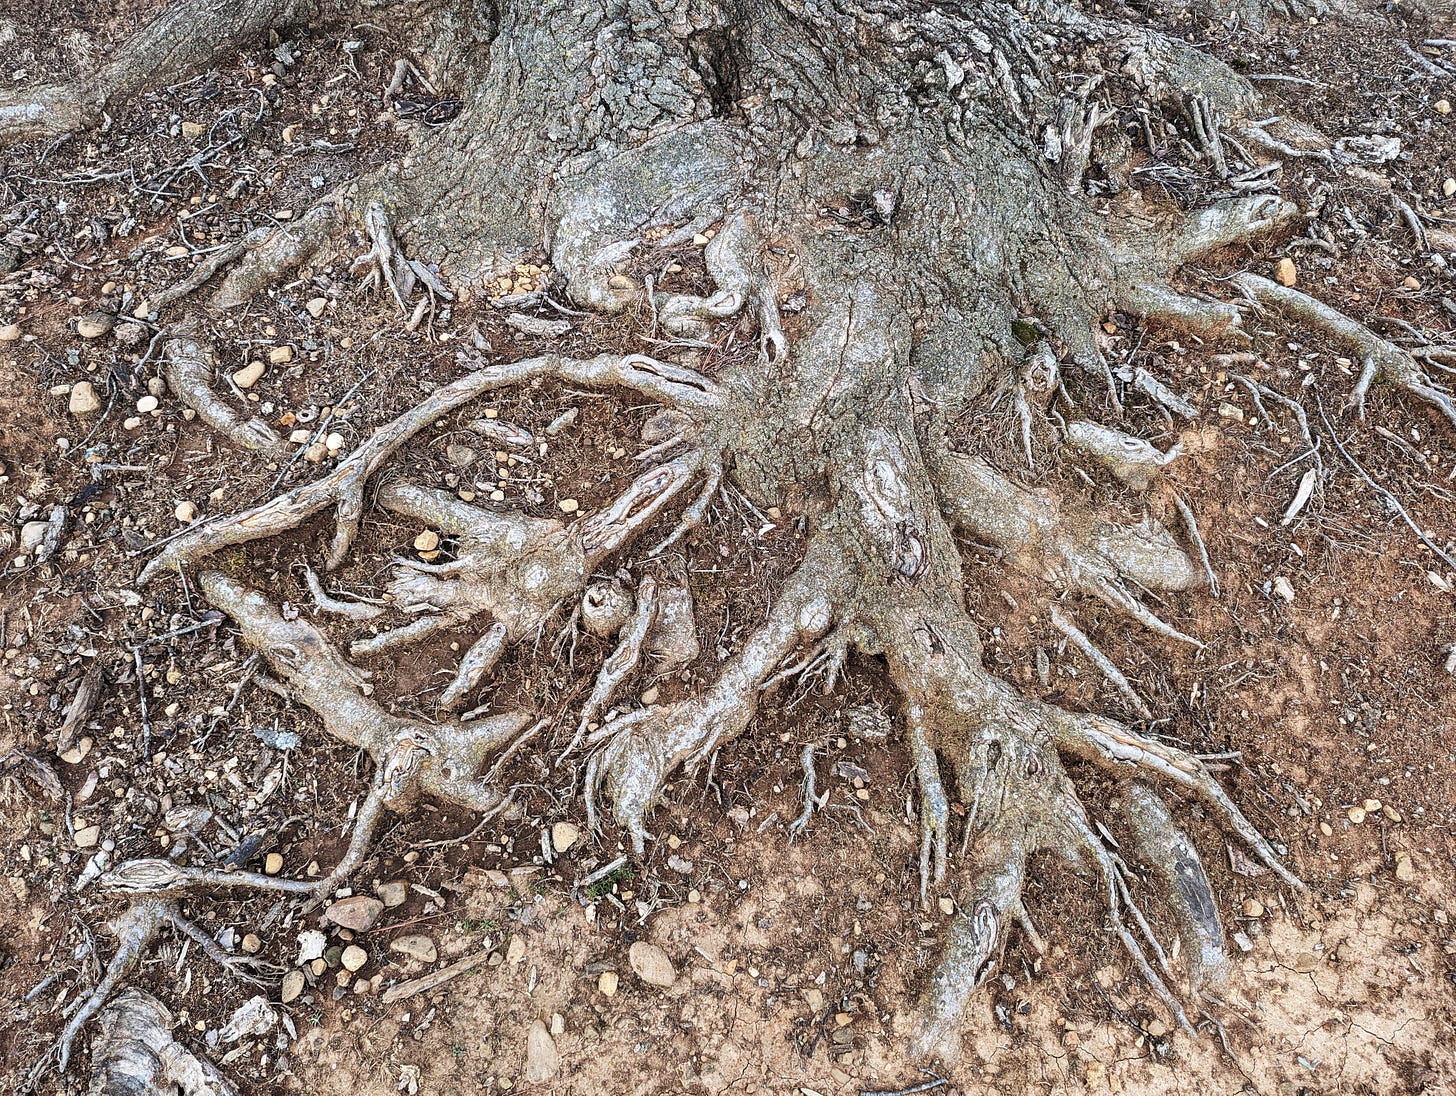 The base of a tree, roots asprawl, intertwined with soil, rocks, and twigs.